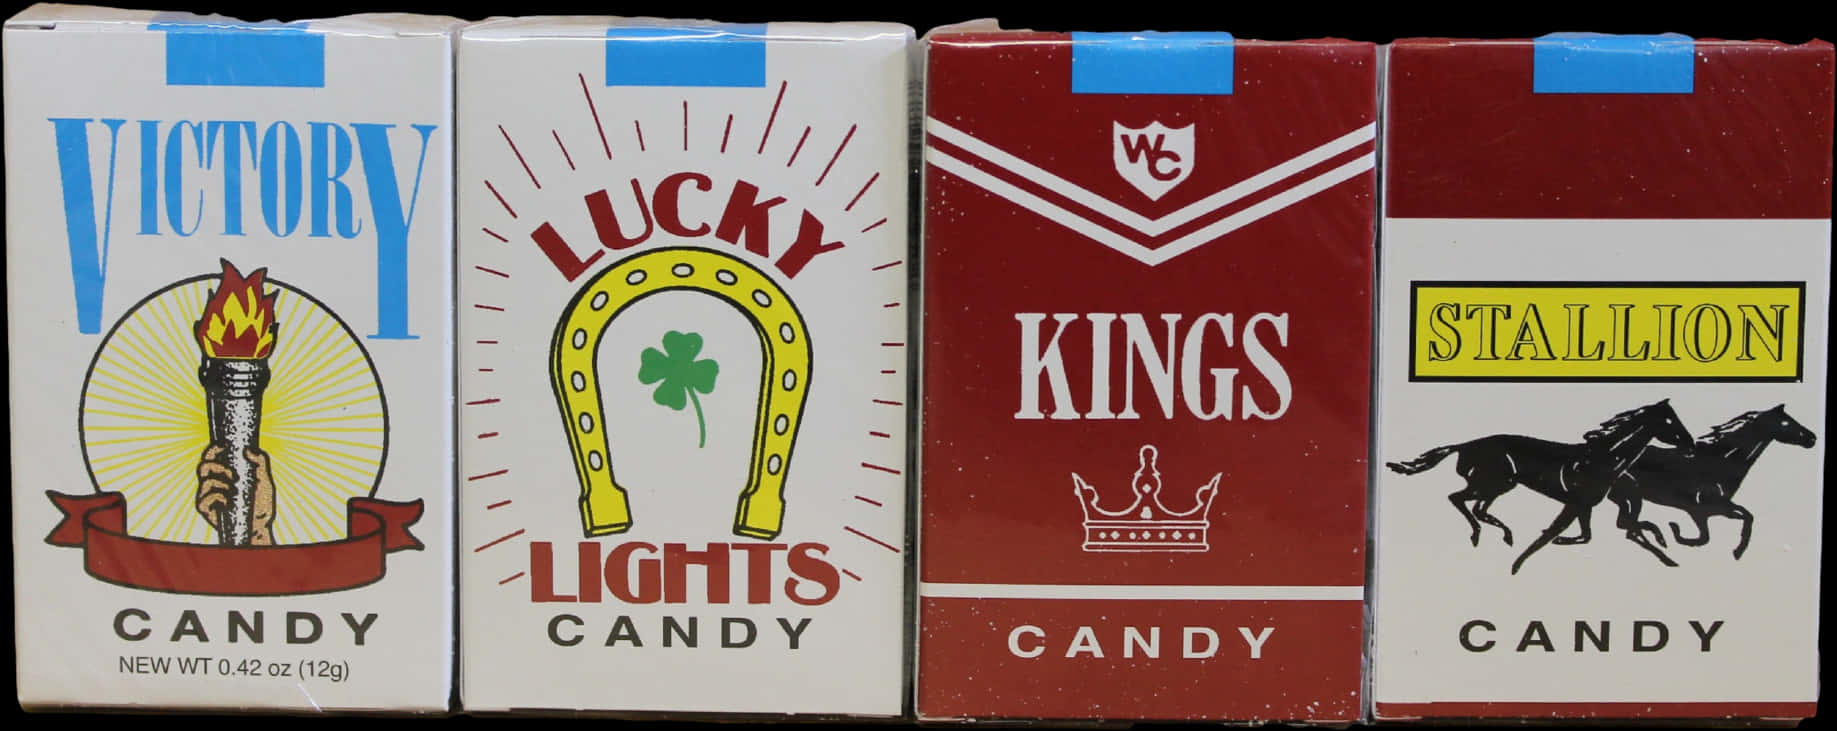 Candy Cigarette Packages Variety PNG